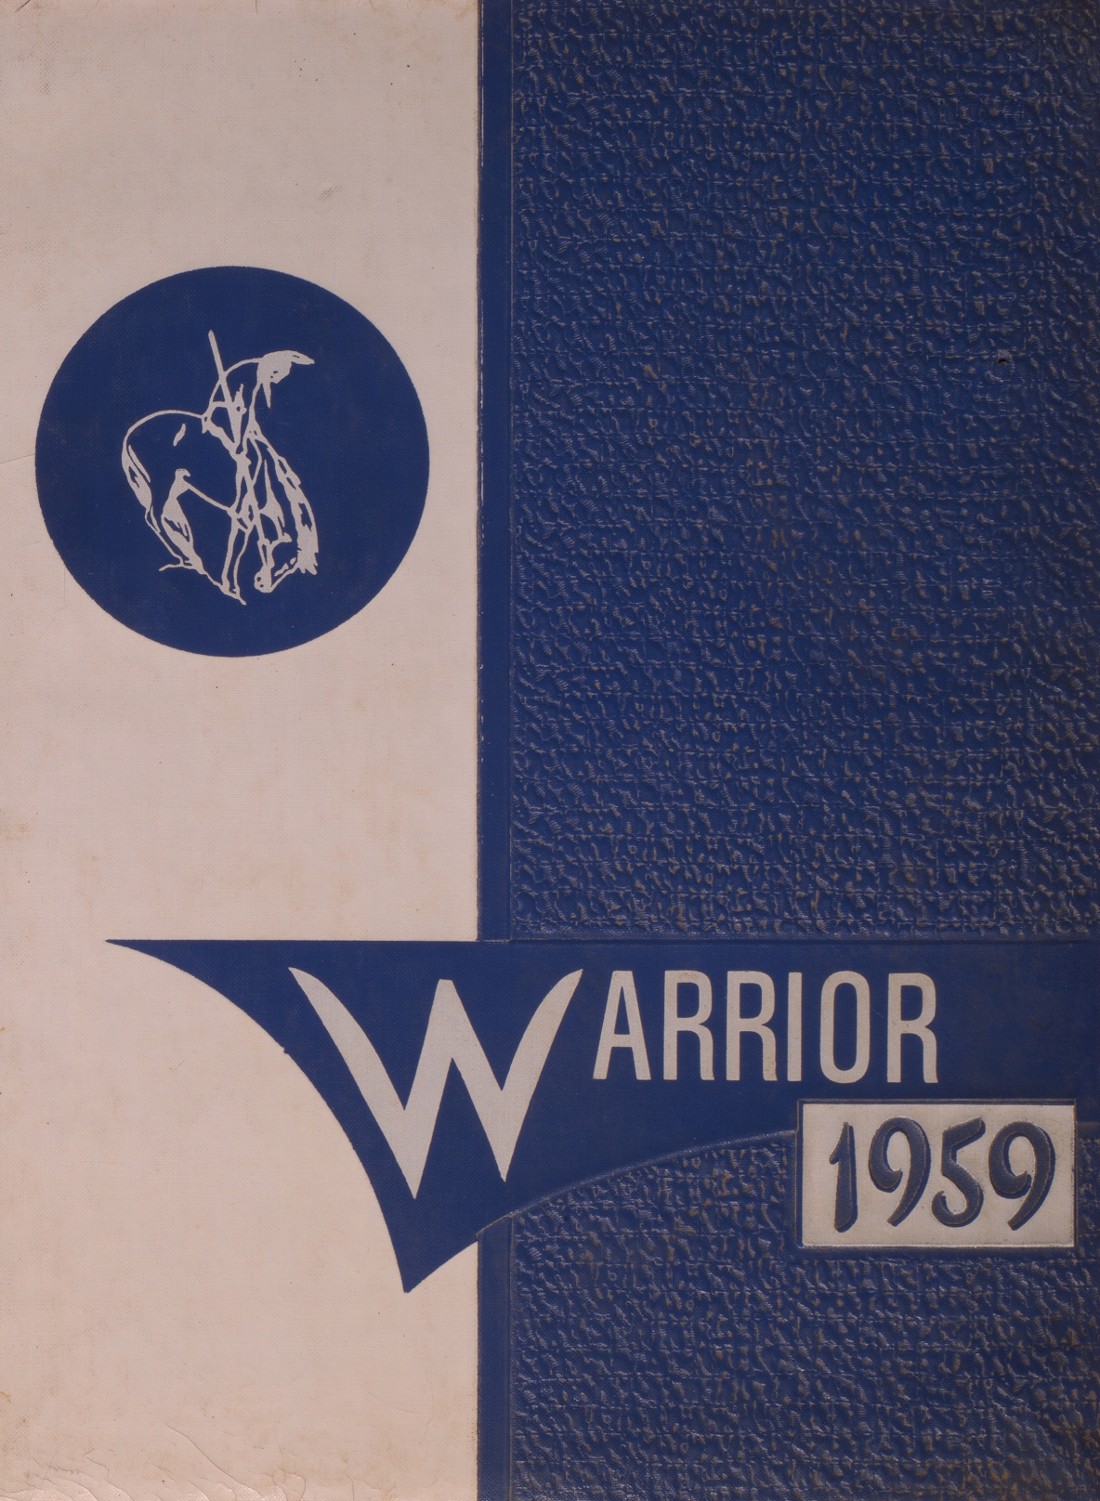 1959 yearbook from Wickes High School from Wickes, Arkansas for sale